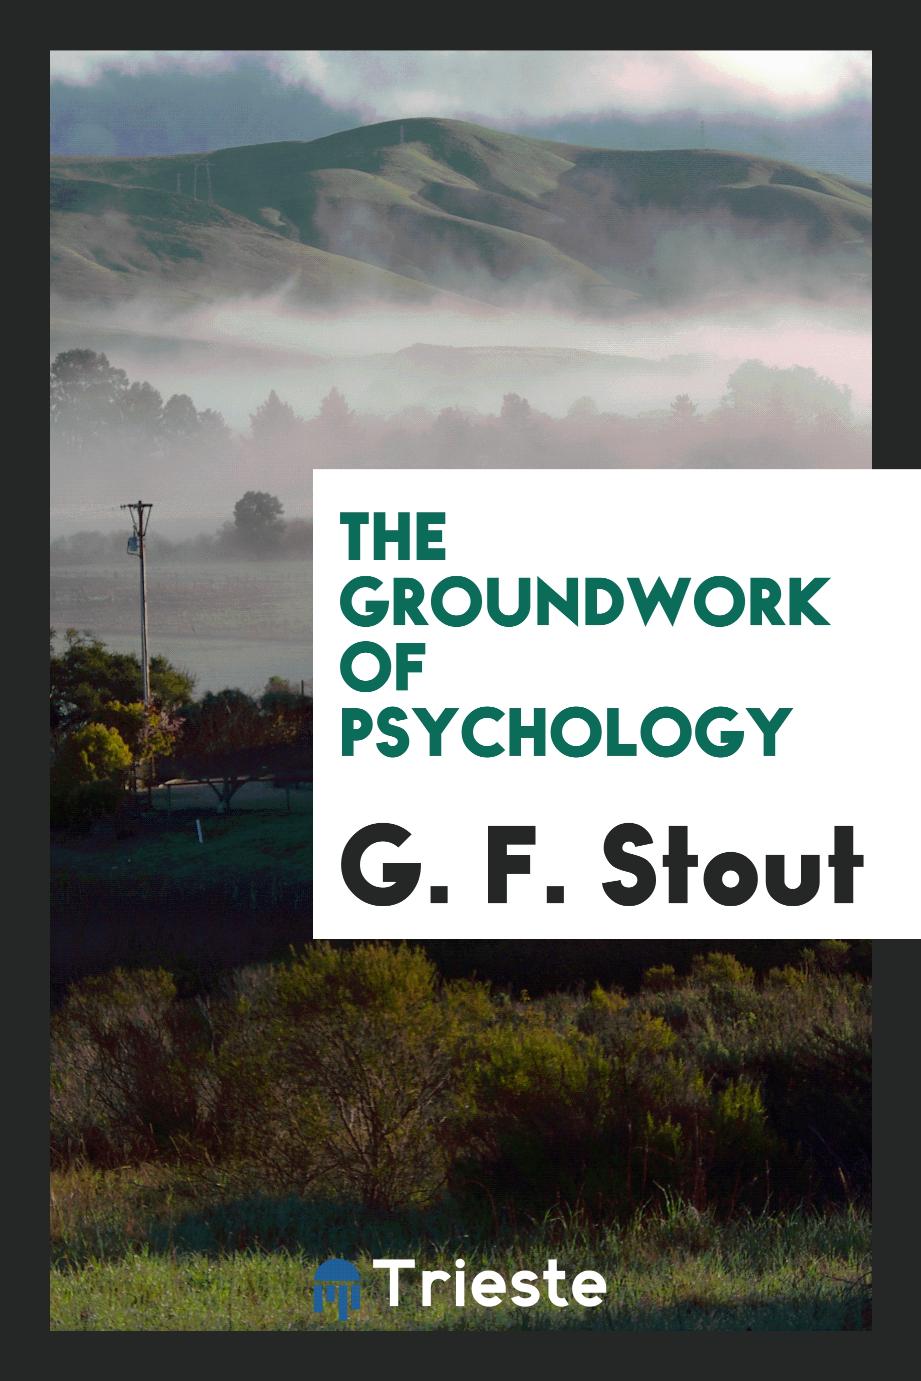 The groundwork of psychology